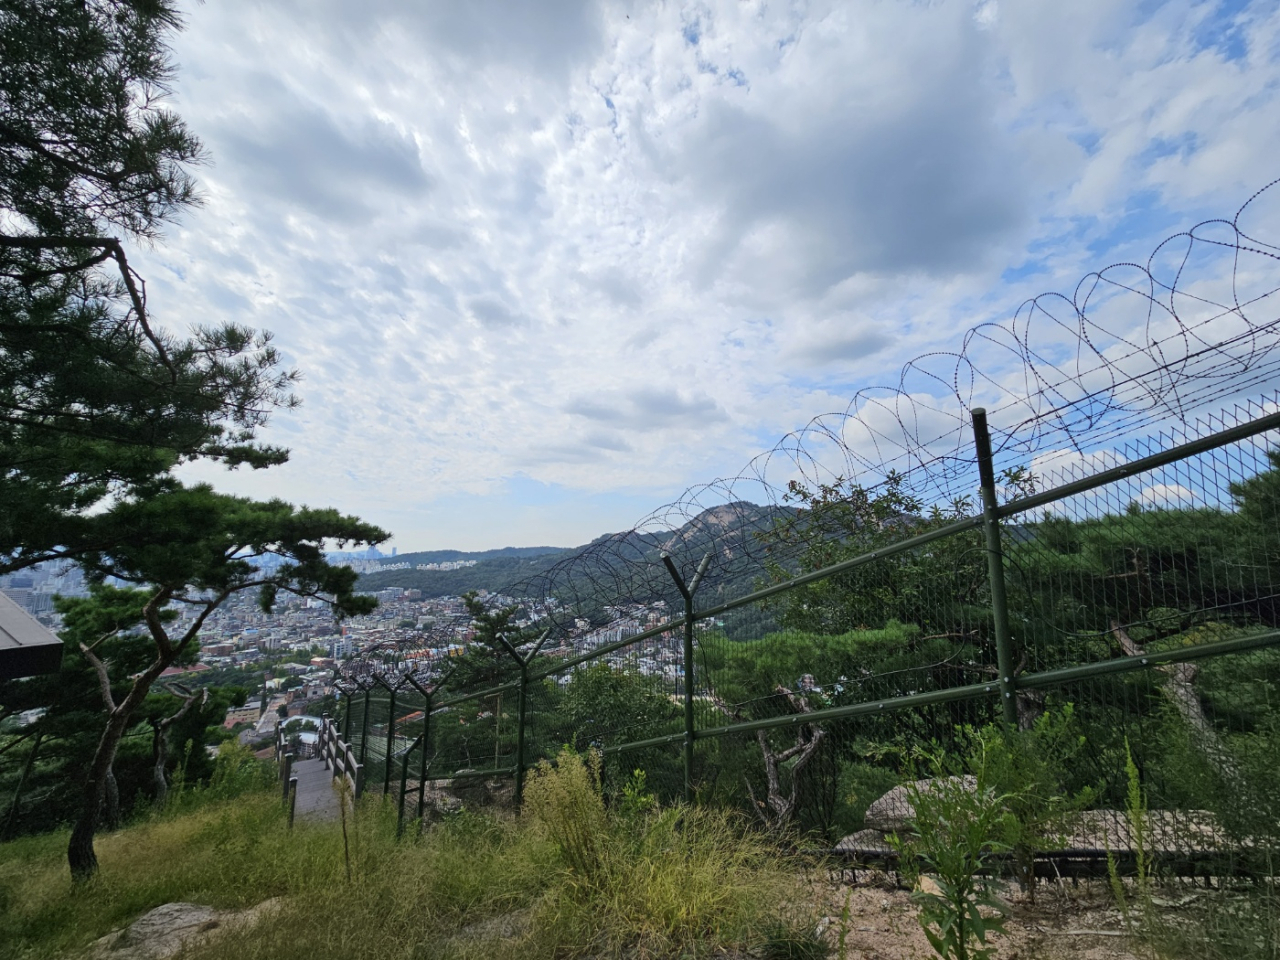 Barbed wire fences are seen next to the Cheong Wa Dae Observatory in Bugaksan, northern Seoul, Tuesday. (Kim Hae-yeon/The Korea Herald)